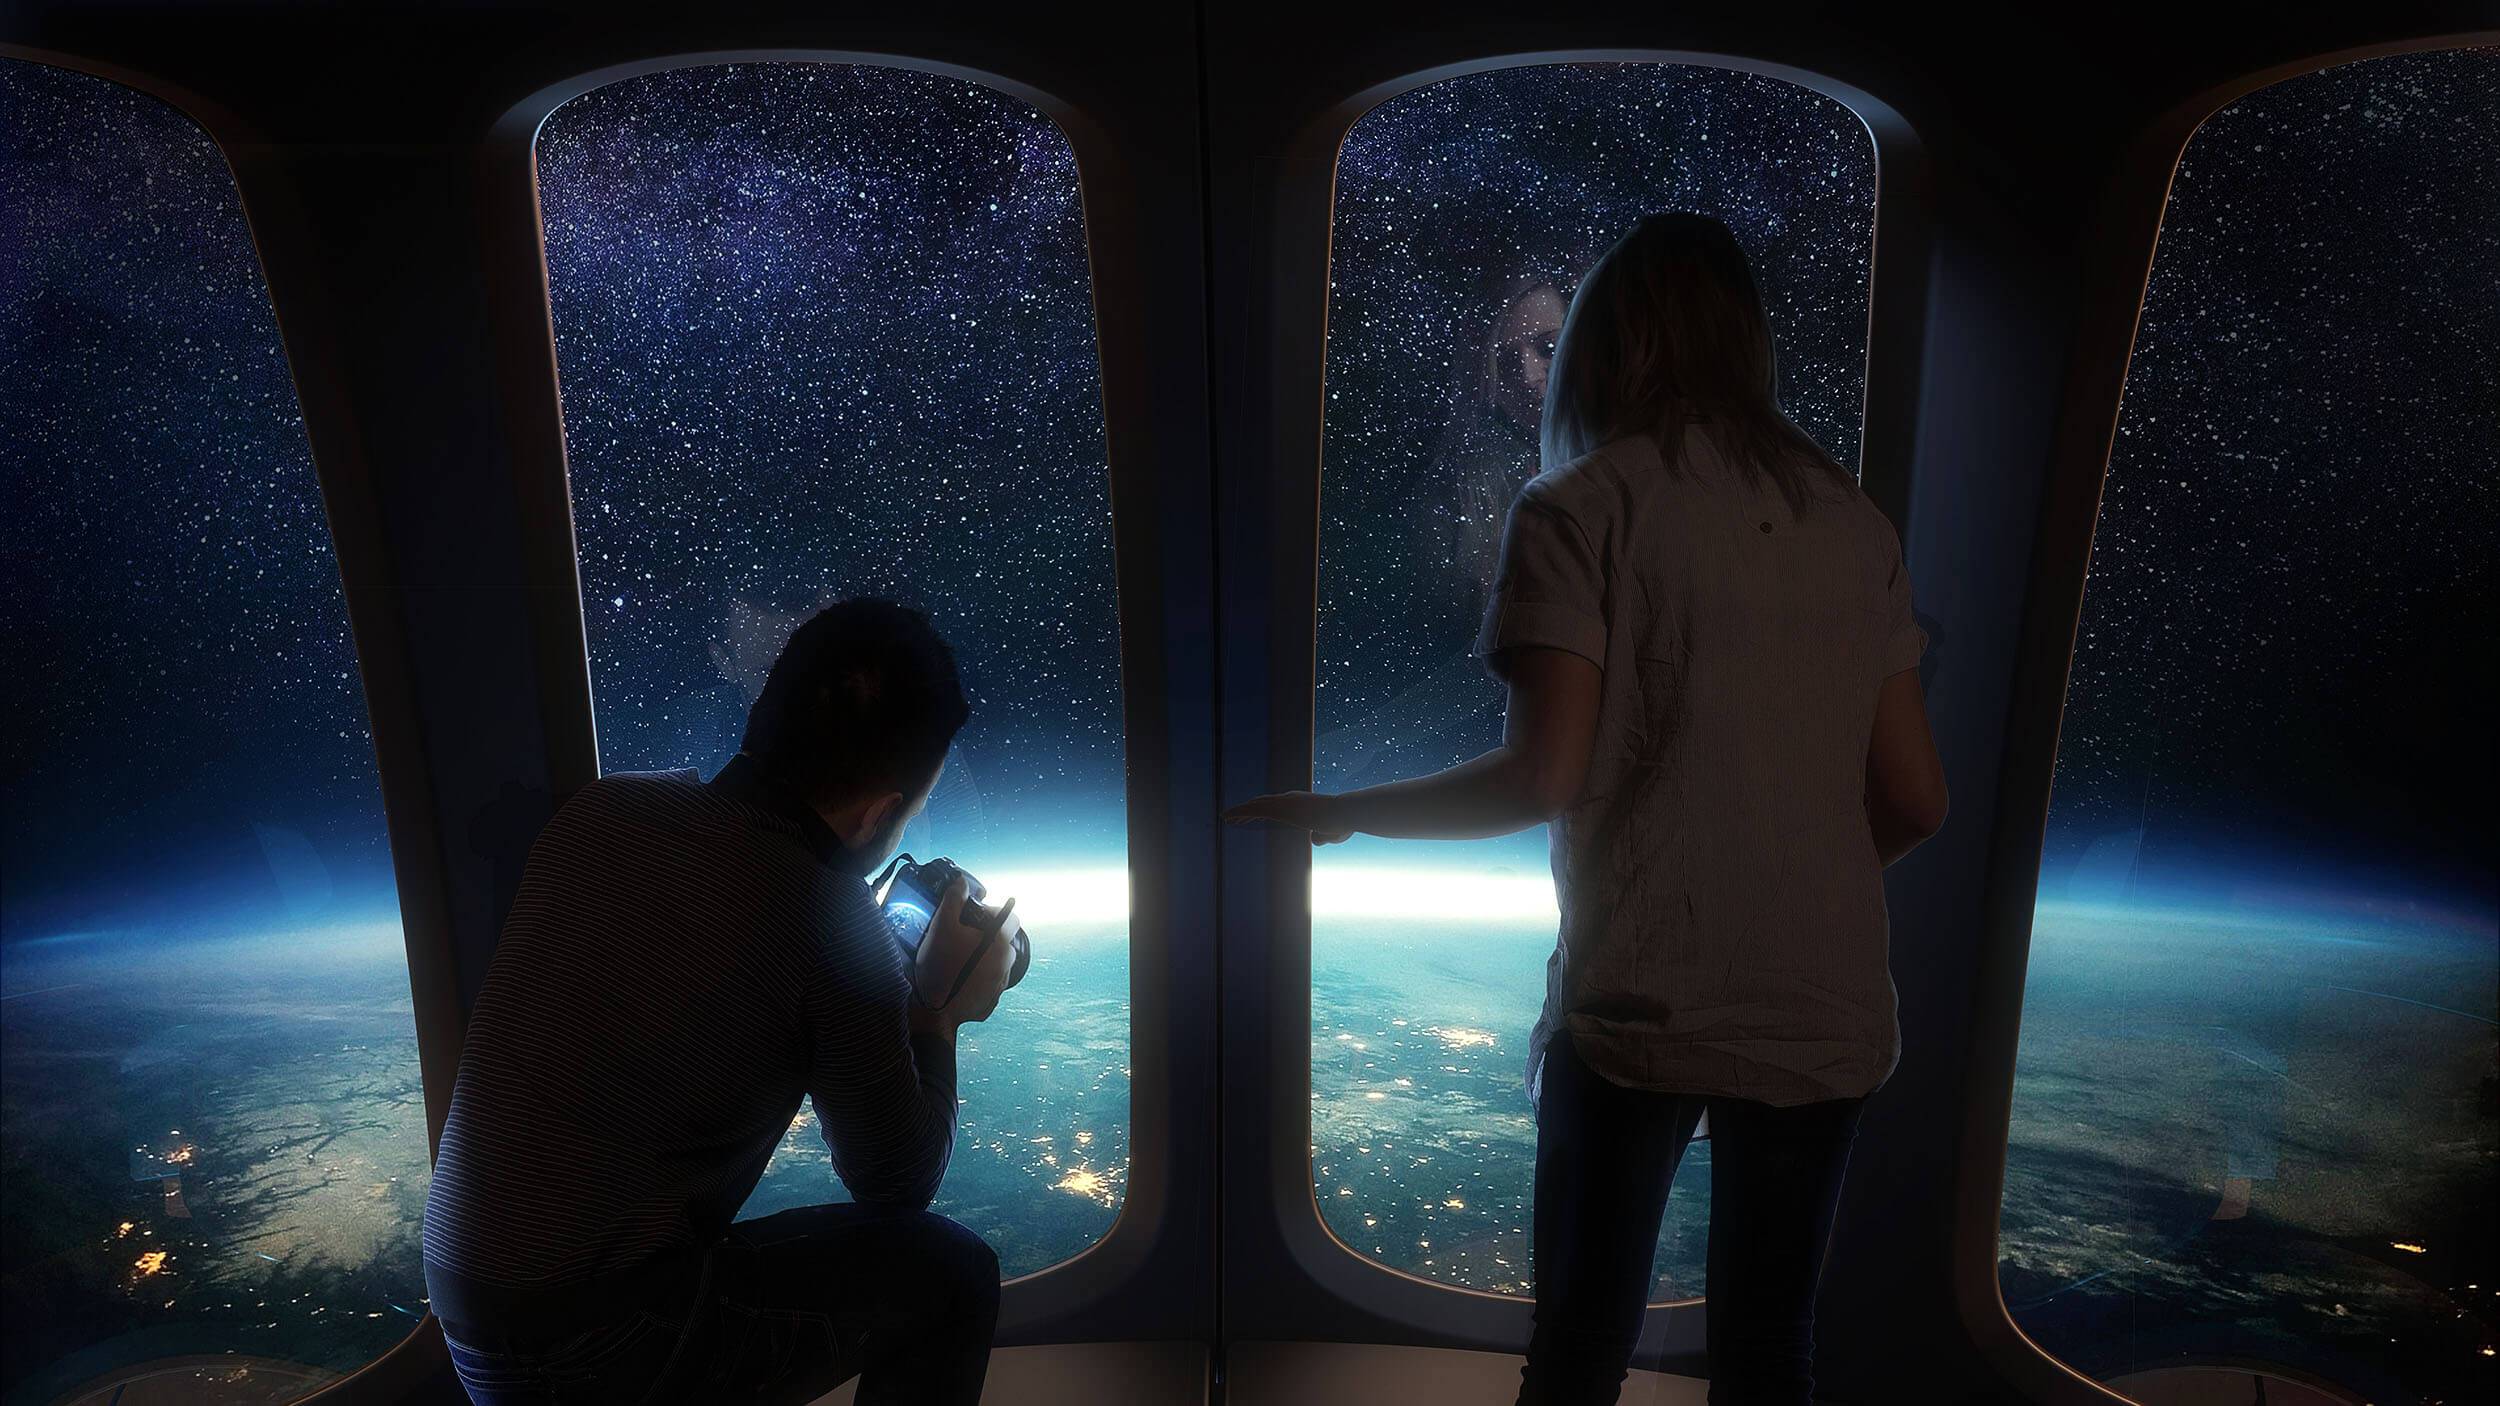 Two people inside a space capsule gazing at space and at the Earth beneath them. One of them is taking photos